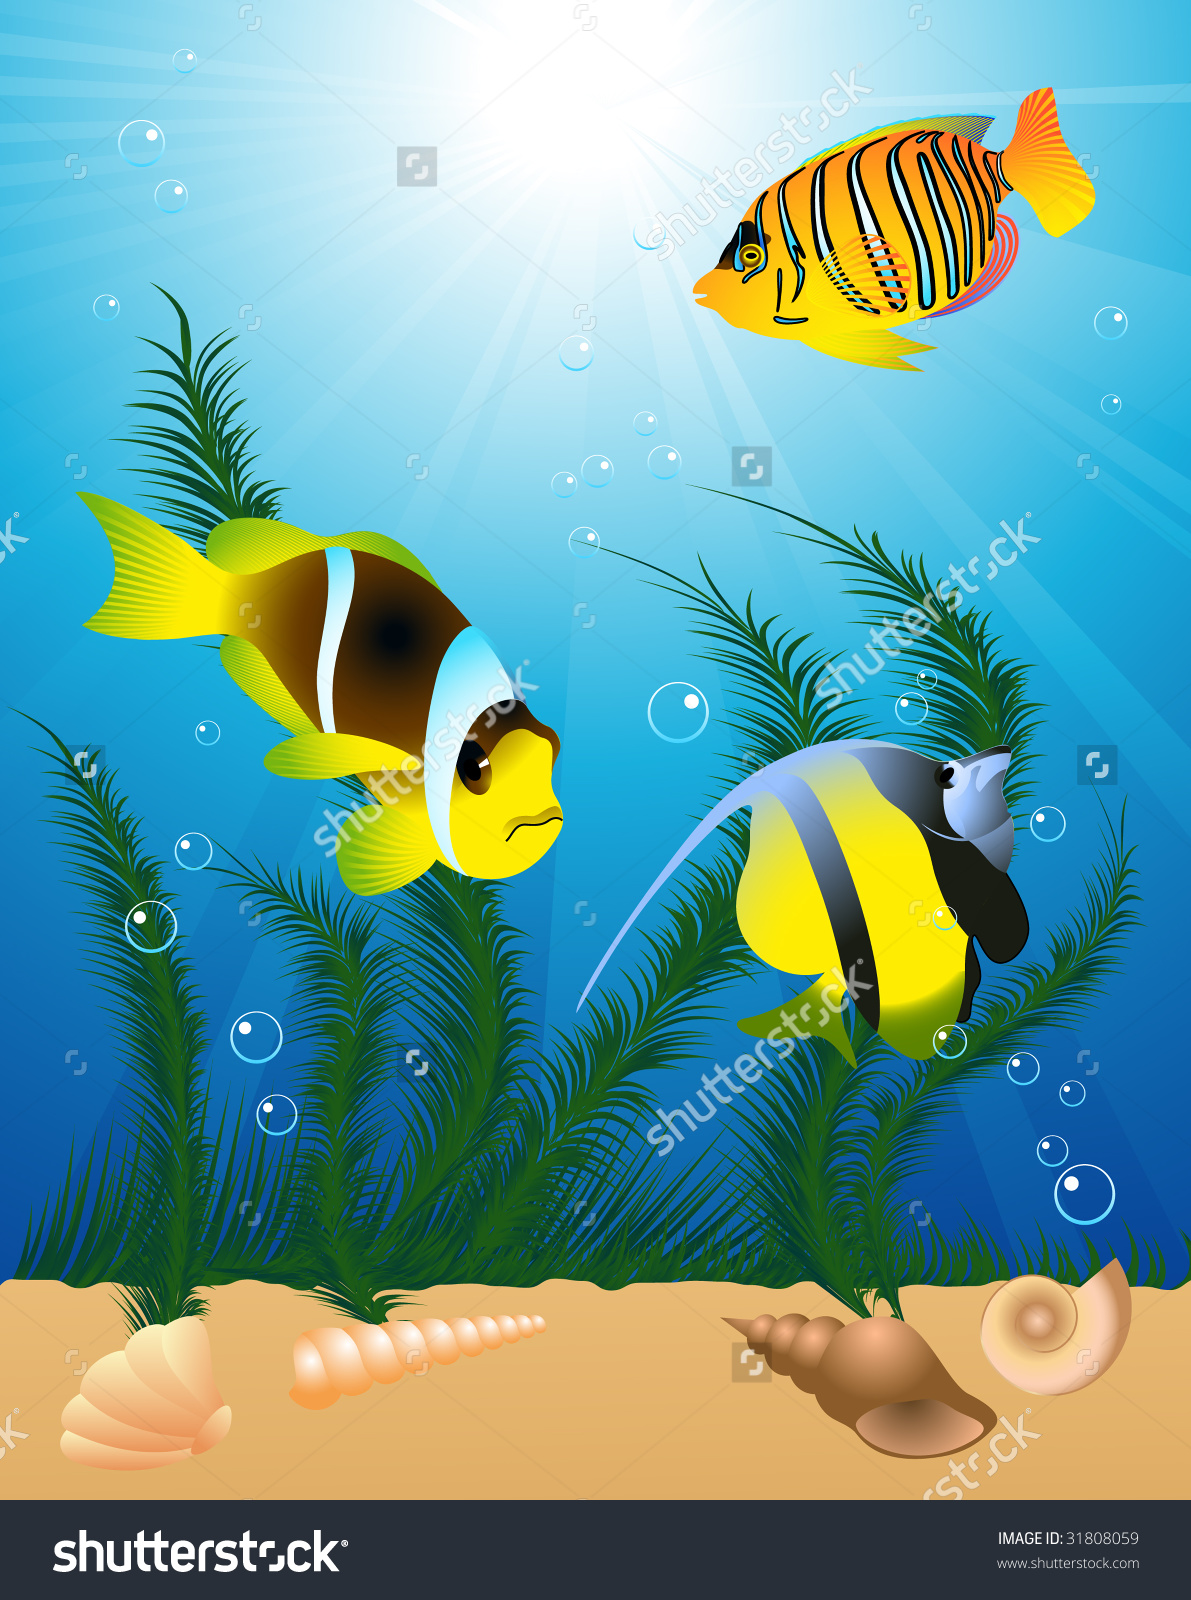 clipart of fish in water - photo #33